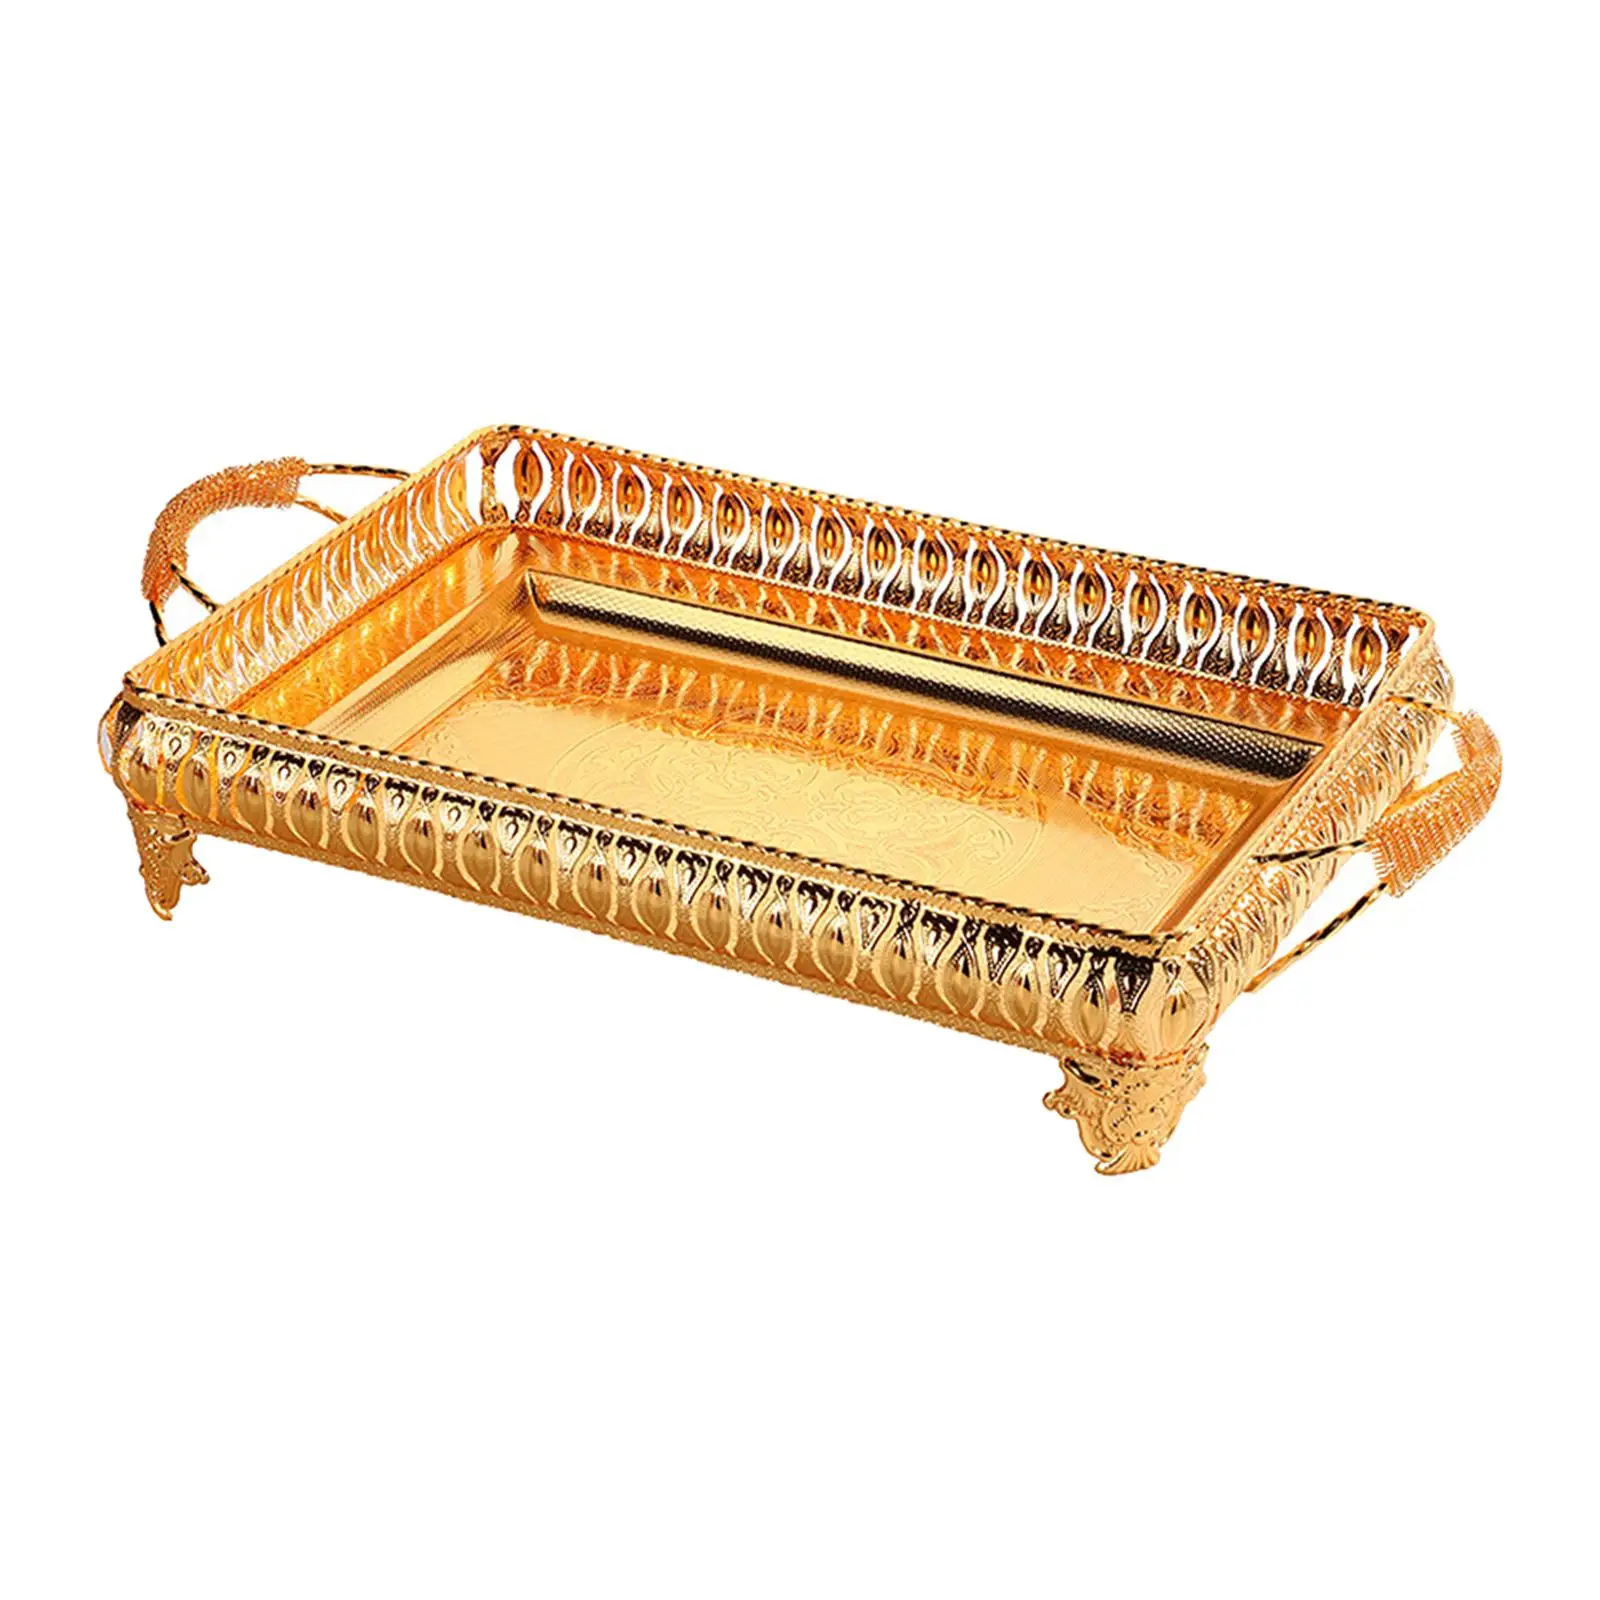 Decorative Tray Multifunctional Serving Tray for Bar Countertop Living Room